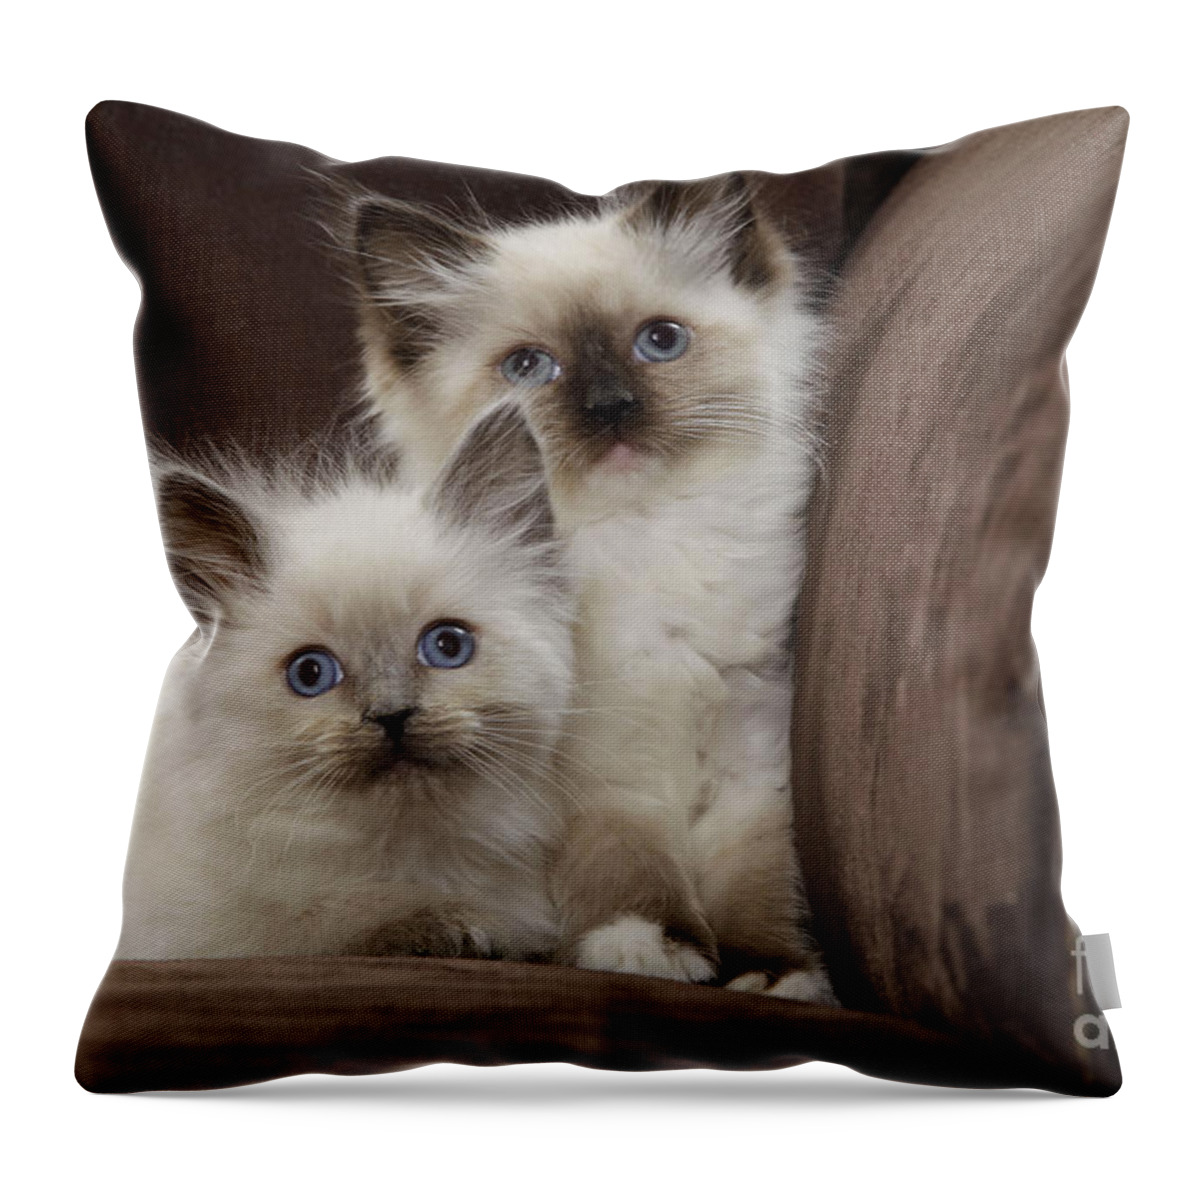 Cat Throw Pillow featuring the photograph Ragdoll Kittens by Jean-Michel Labat